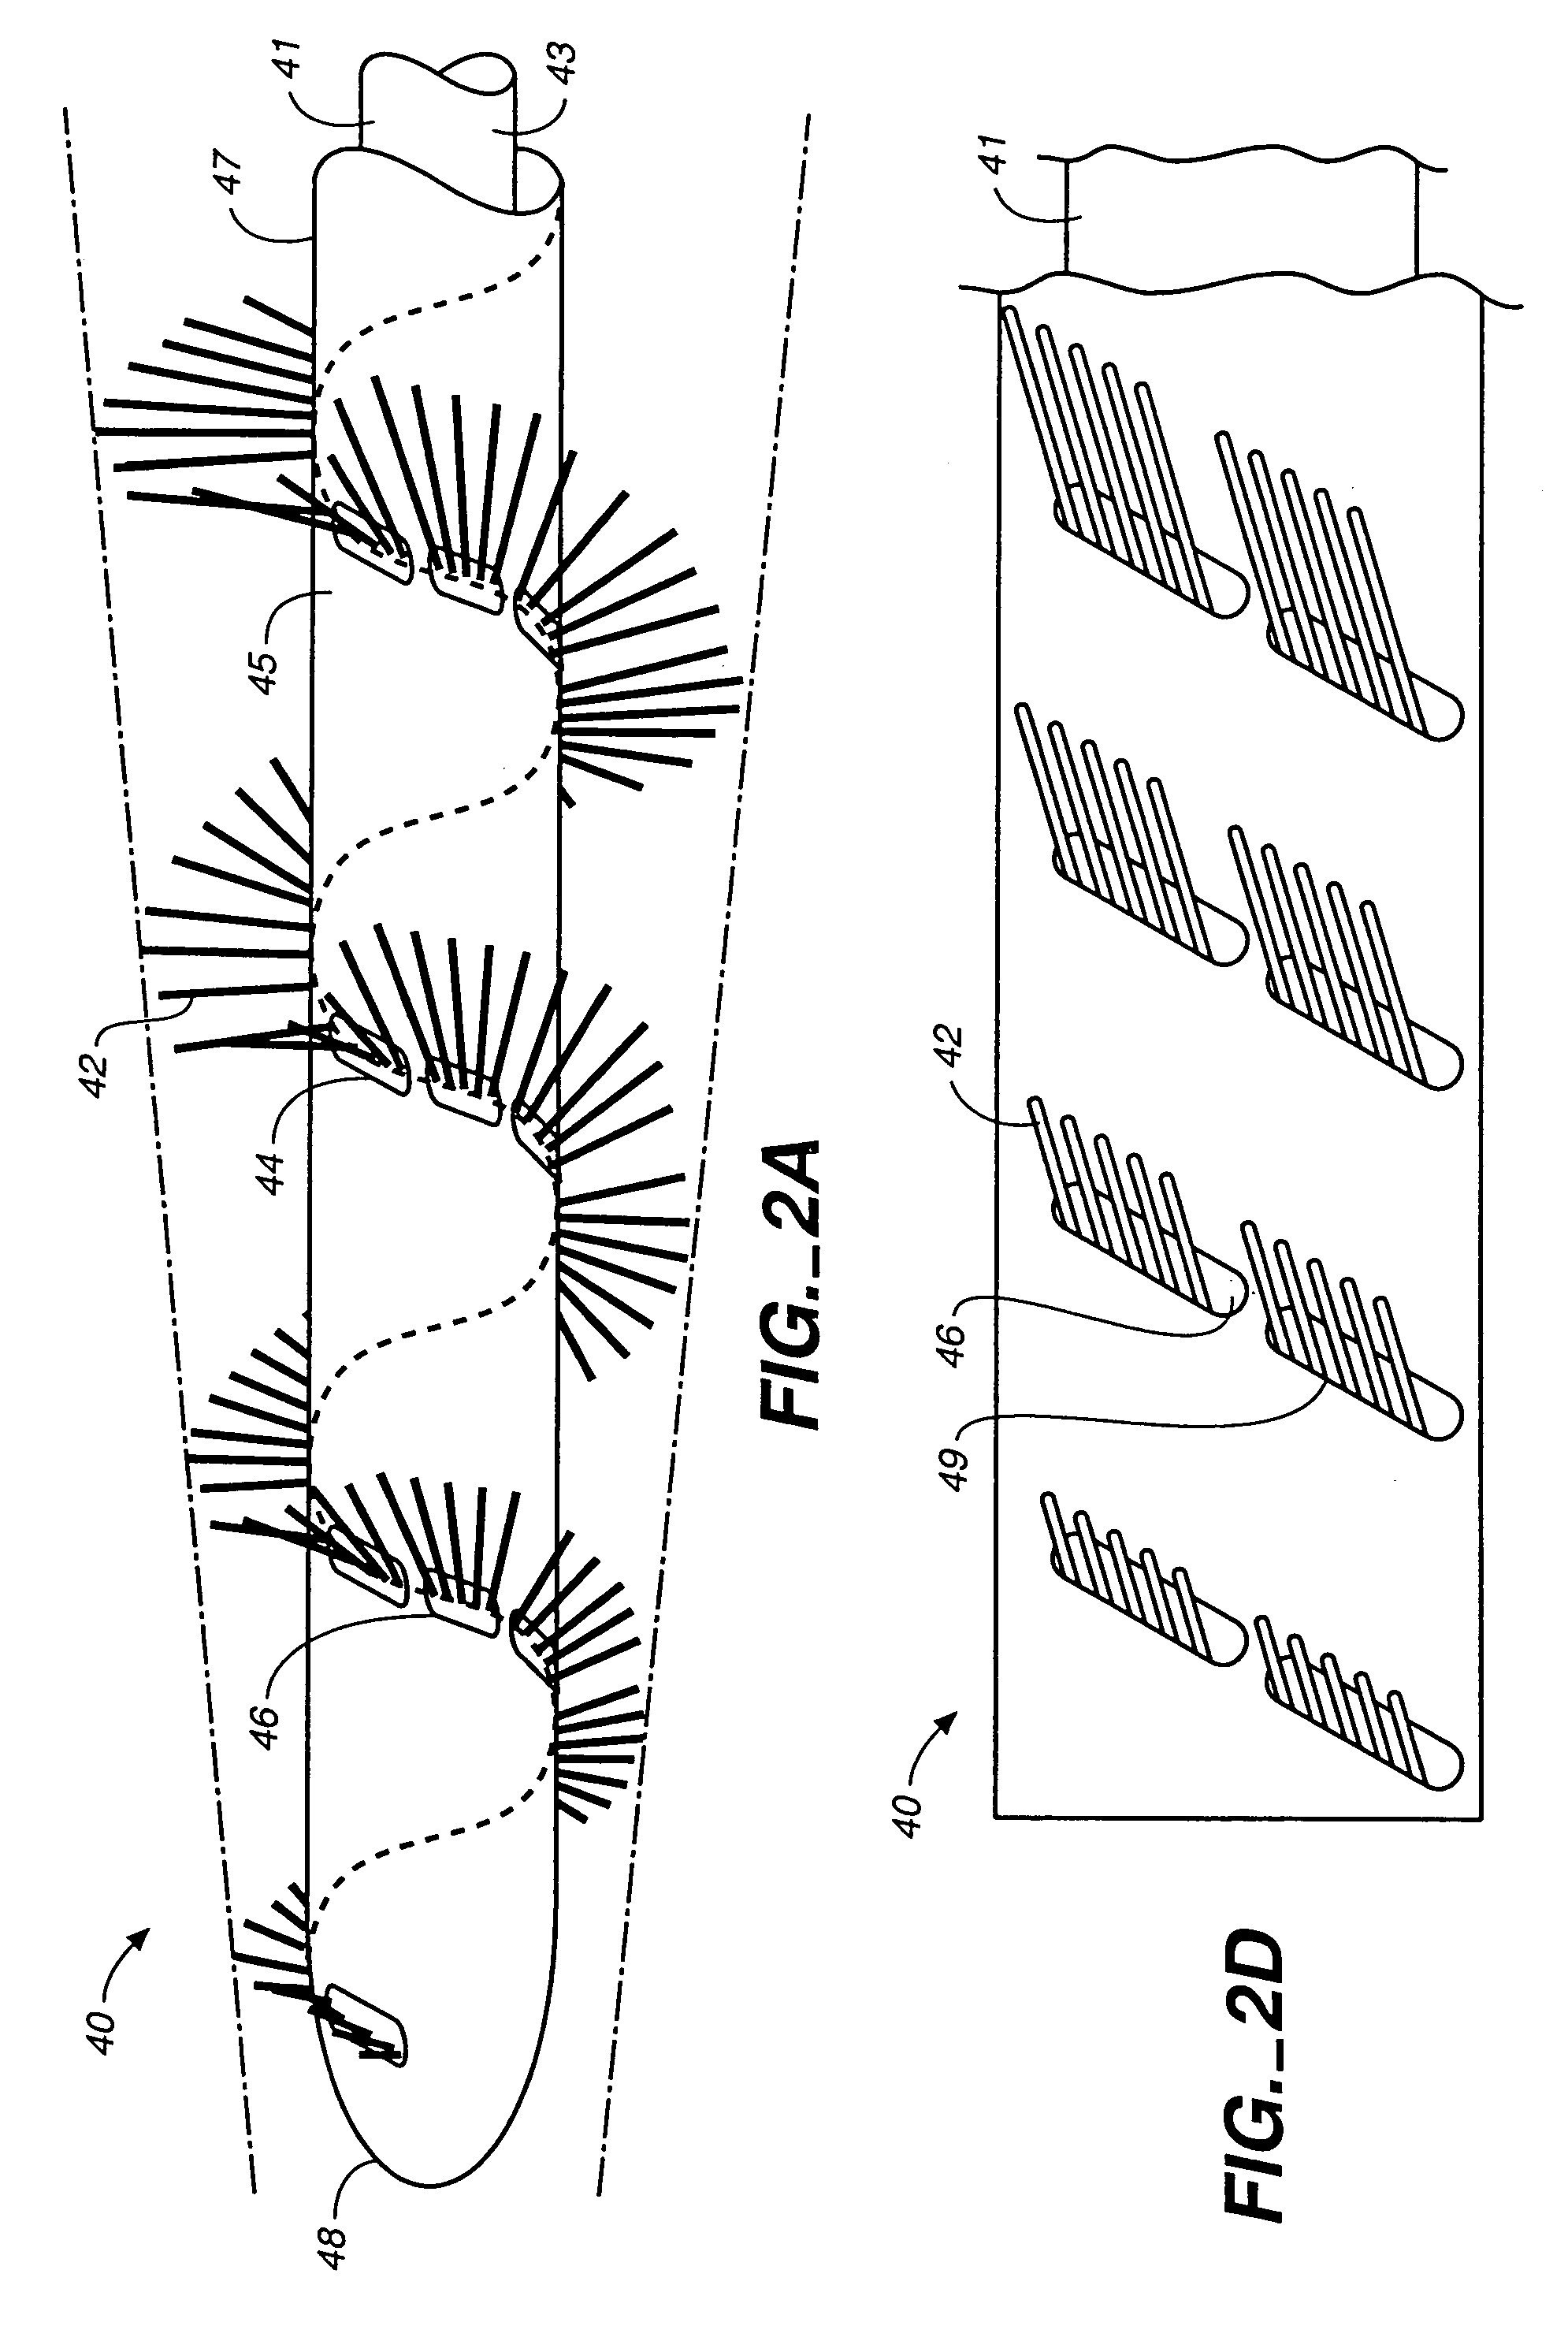 Intravascular material removal device